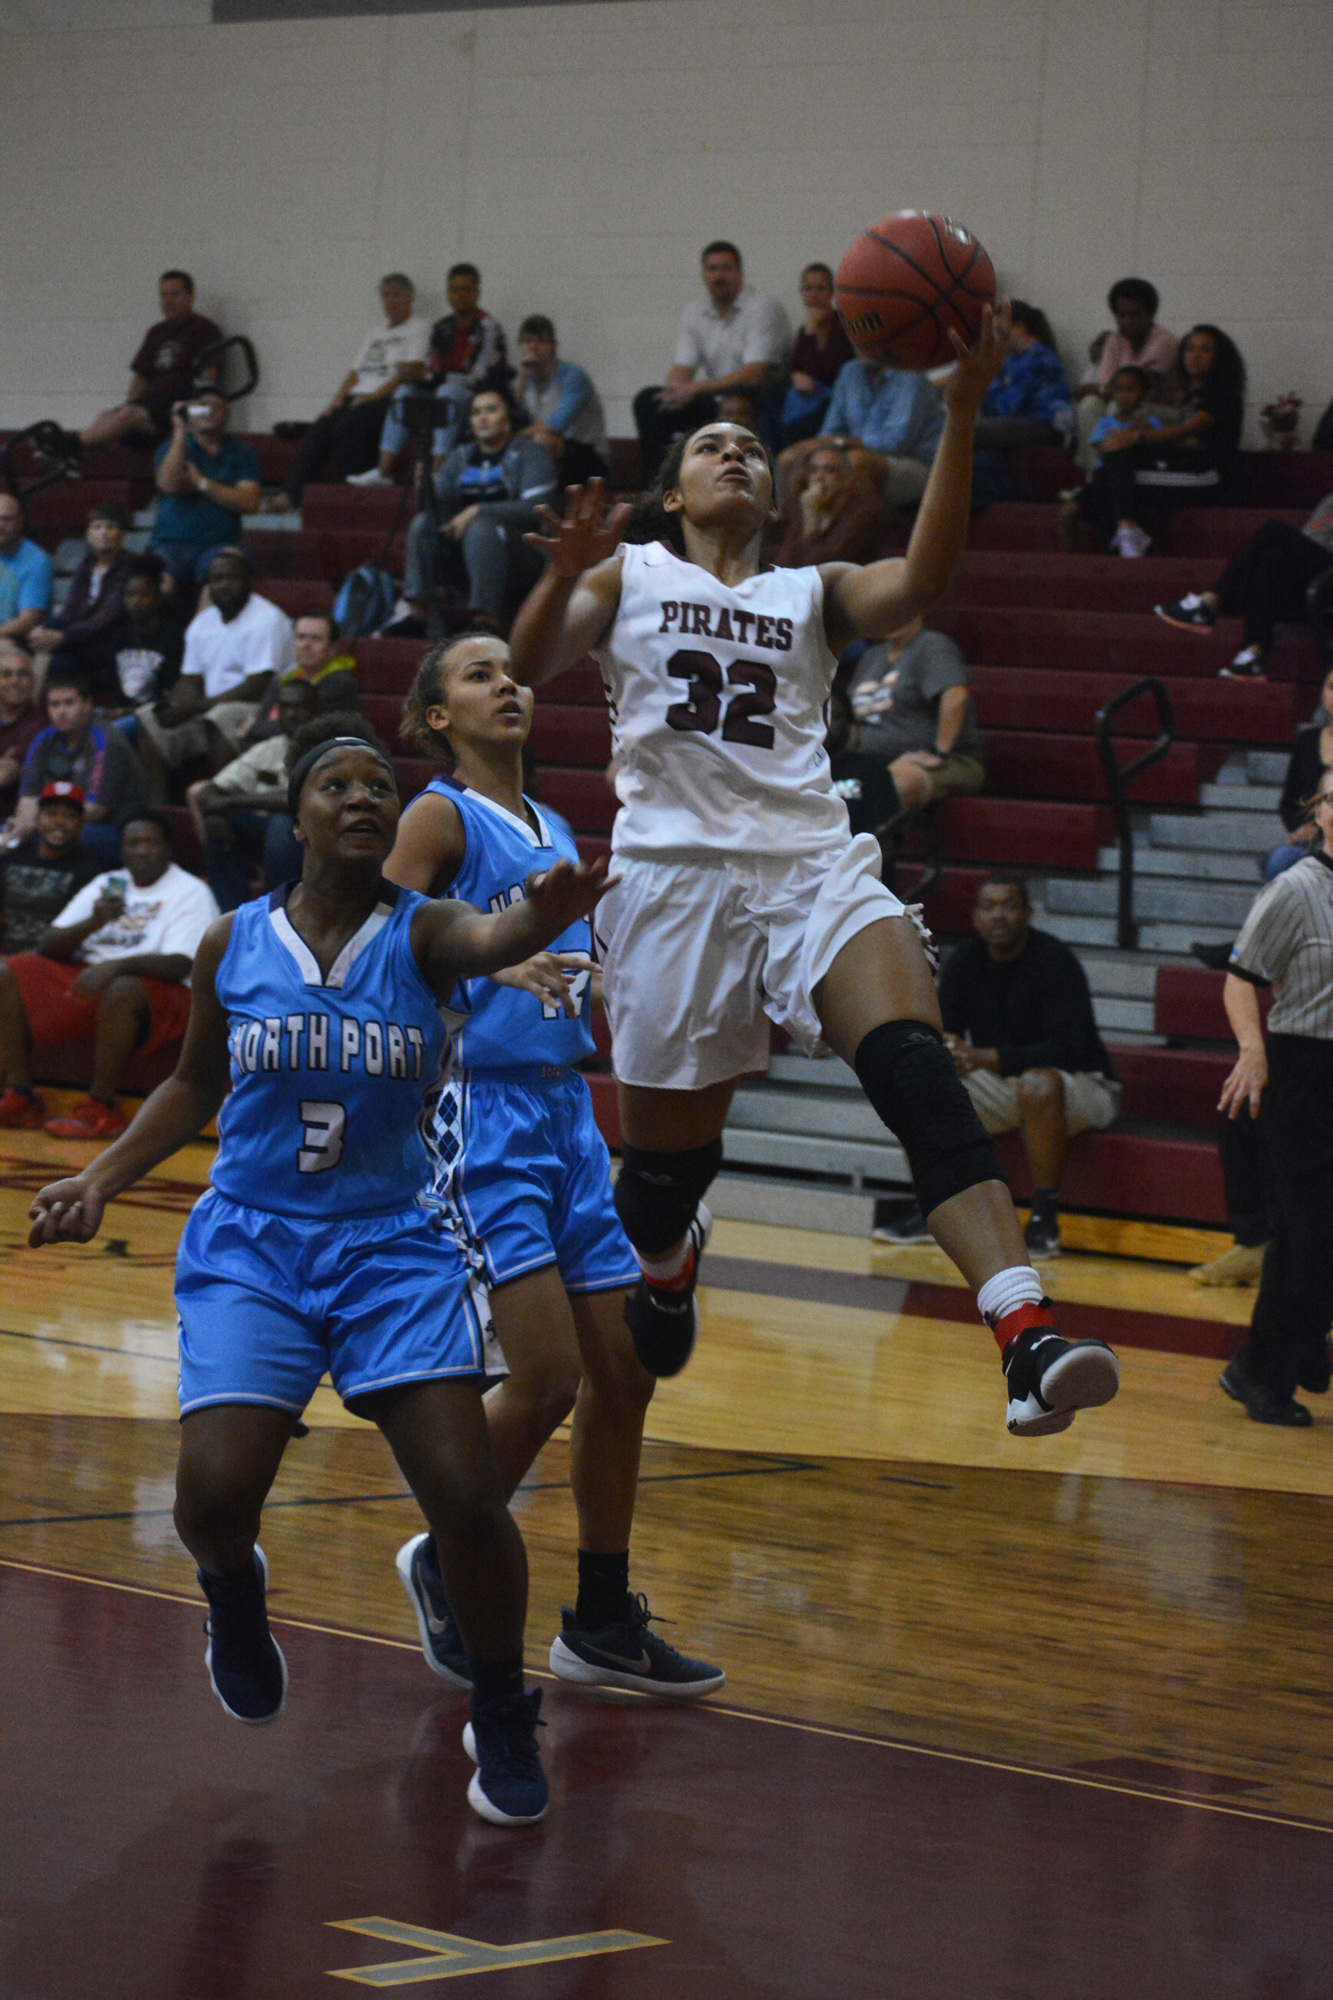 Sophomore Julia Rodriguez sinks a layup against North Port. She had 14 points.